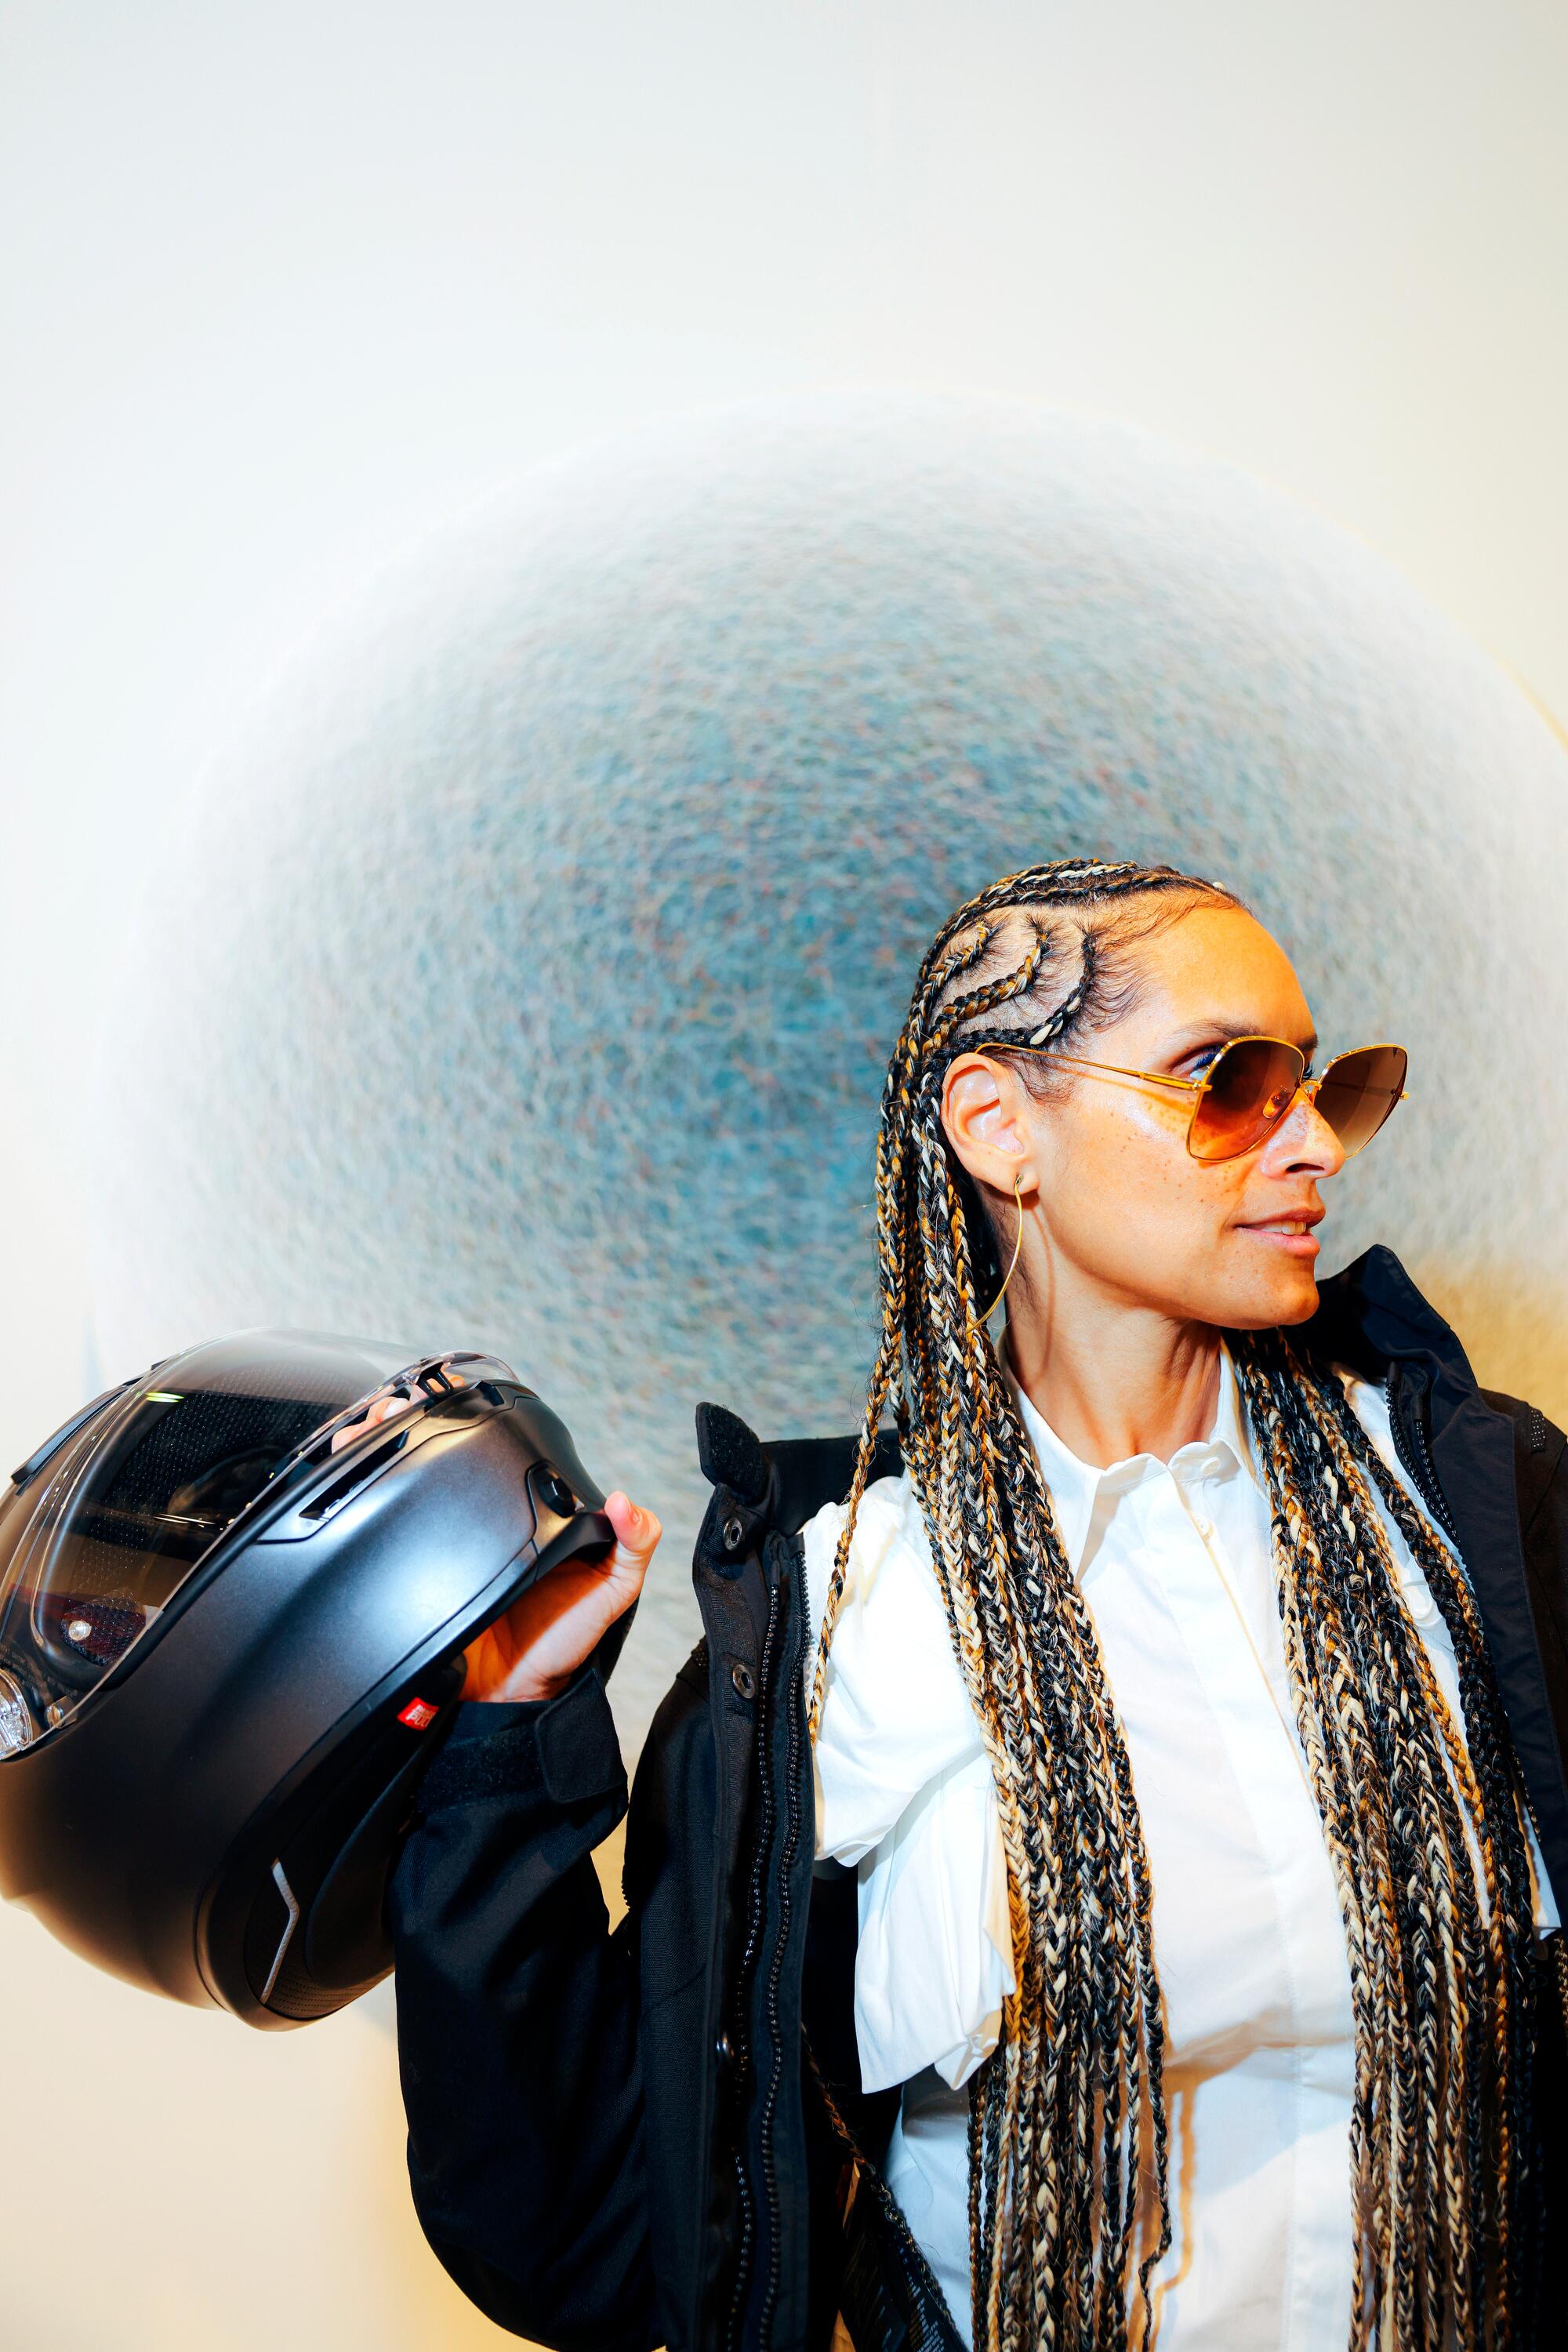 A person with long braids poses in front of a work of art holding a motorcycle helmet.